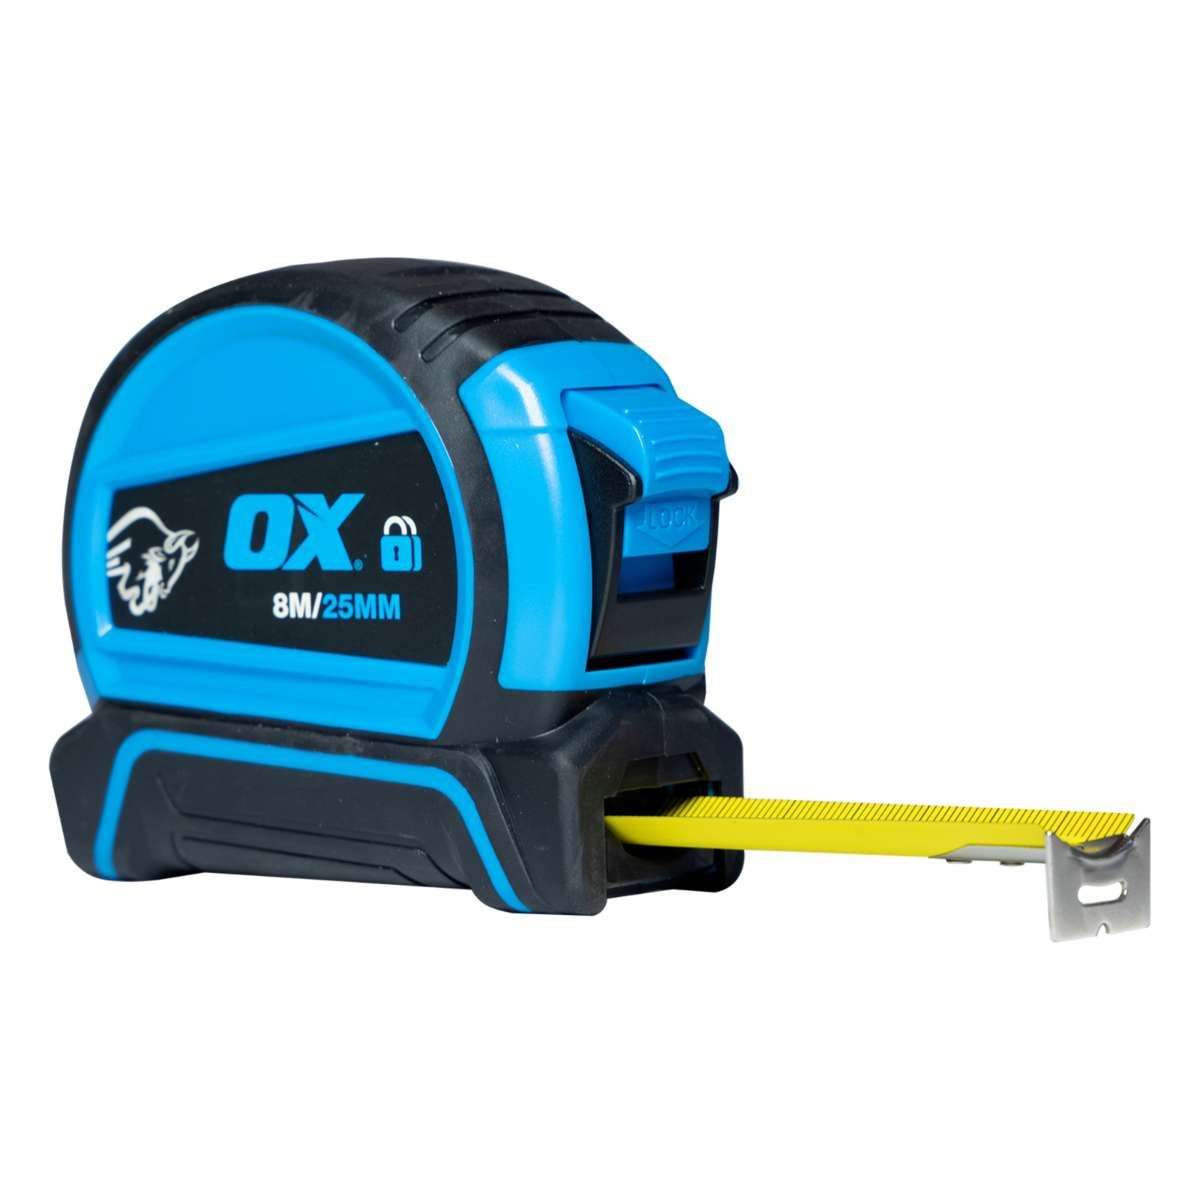 Double Locking Tape Measure 8m - OX-T505208 by OX